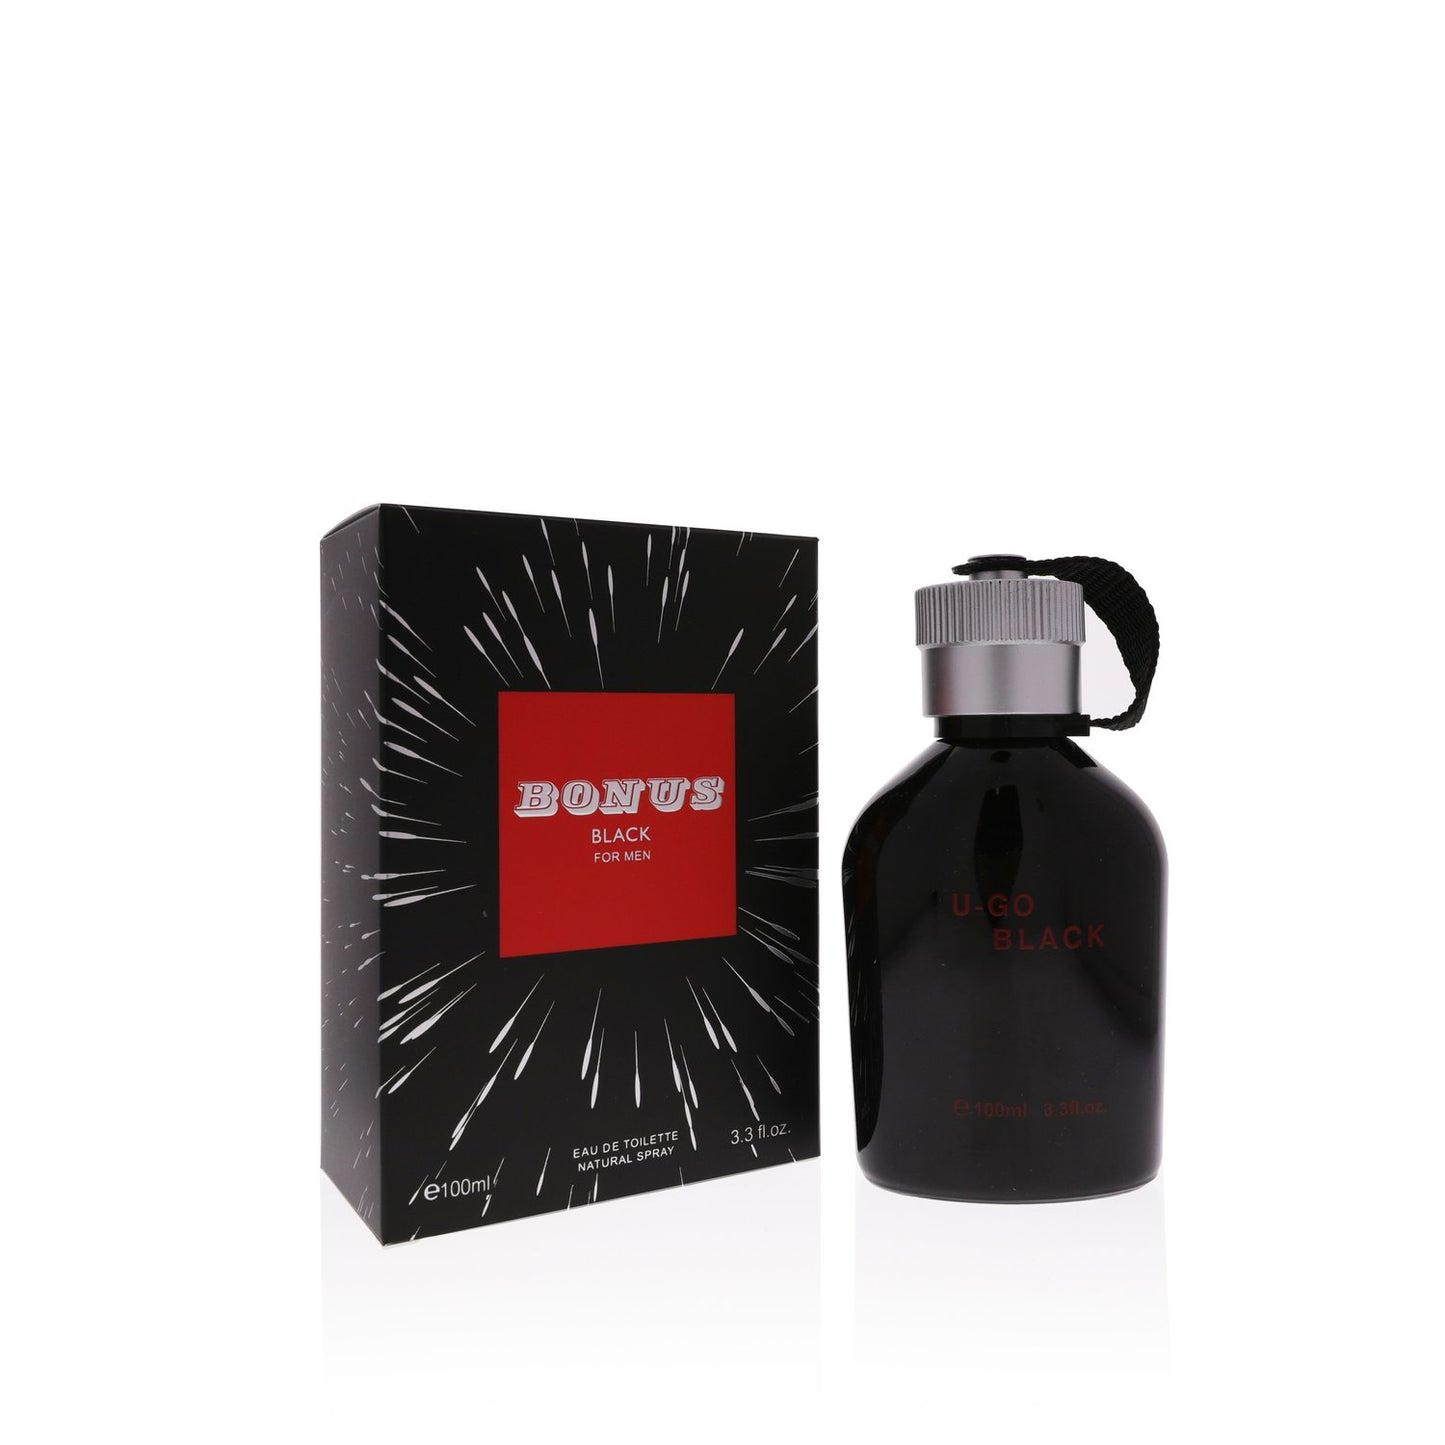 Bonus Black Men's Cologne: Elevate Your Presence with the Dynamic and Captivating Essence of this Invigorating Fragrance - A Must-Have for the Modern Gentleman!